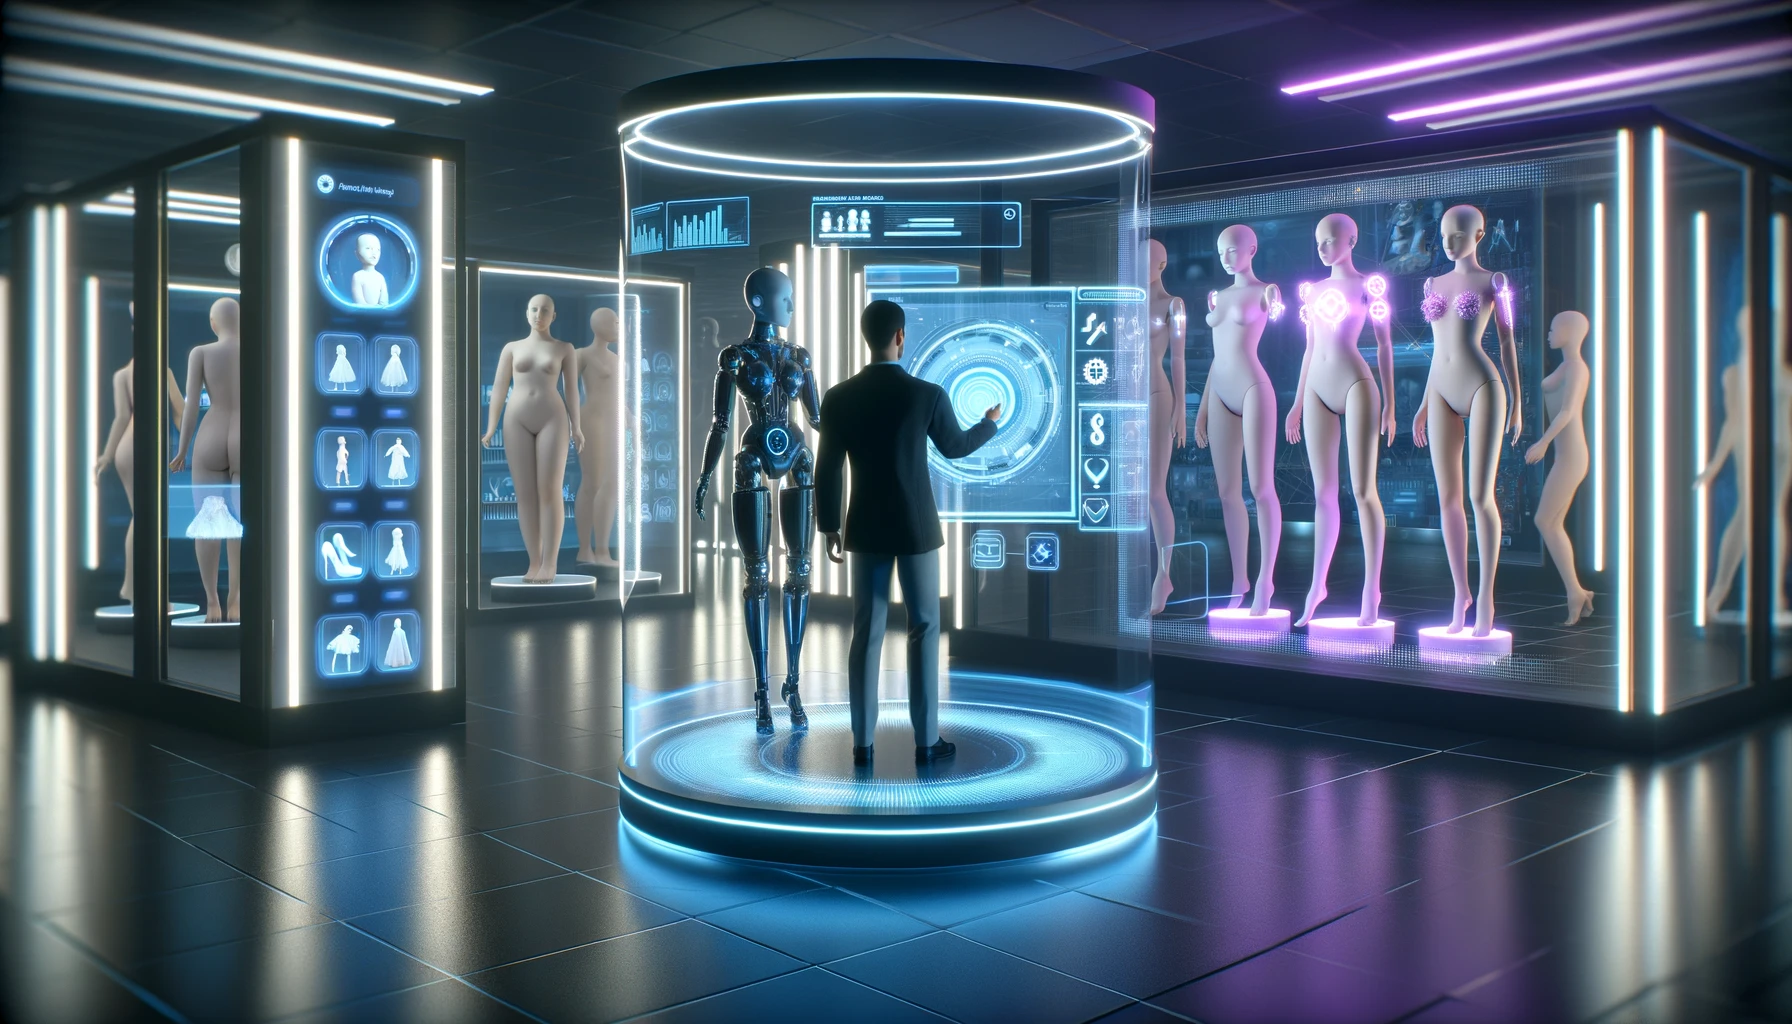 This image illustrates the concept of advanced scanning technology in a futuristic setting, highlighting the precision and customization capabilities of AI systems.